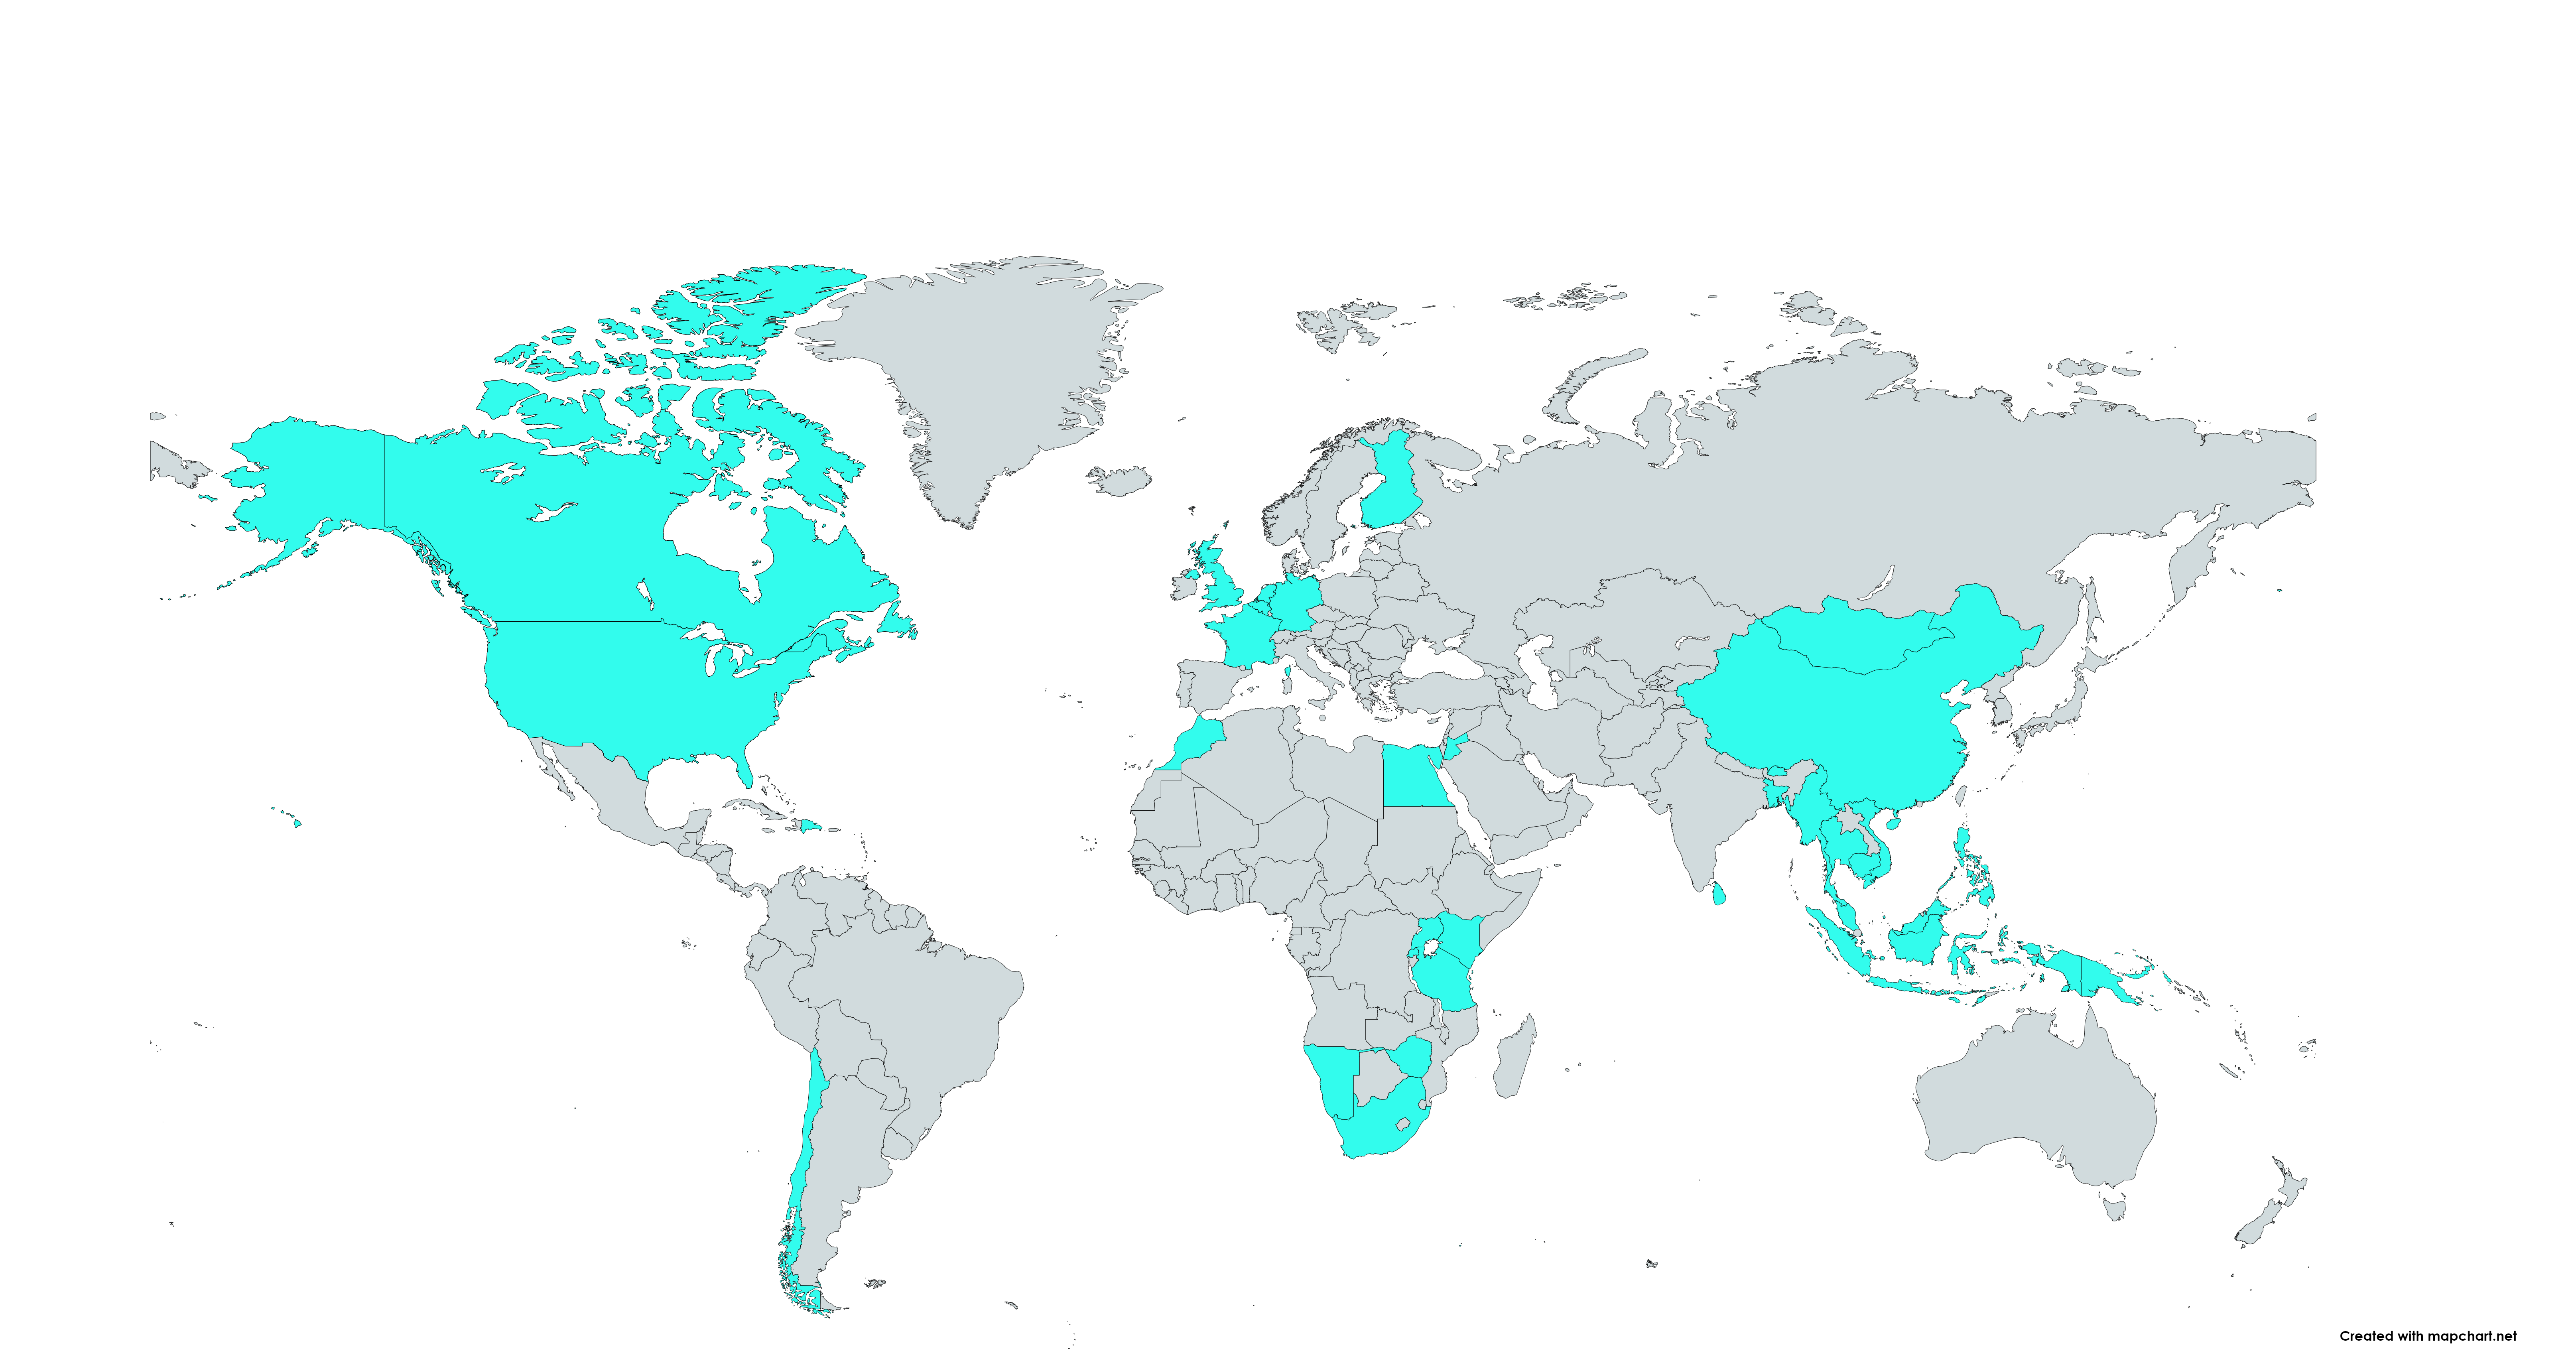 A world map showing the countries Emma Day and Dr Sabine K Witting have contributed projects too. Various countries around Europe, Asia, Africa, and North and South America are highlighted in blue